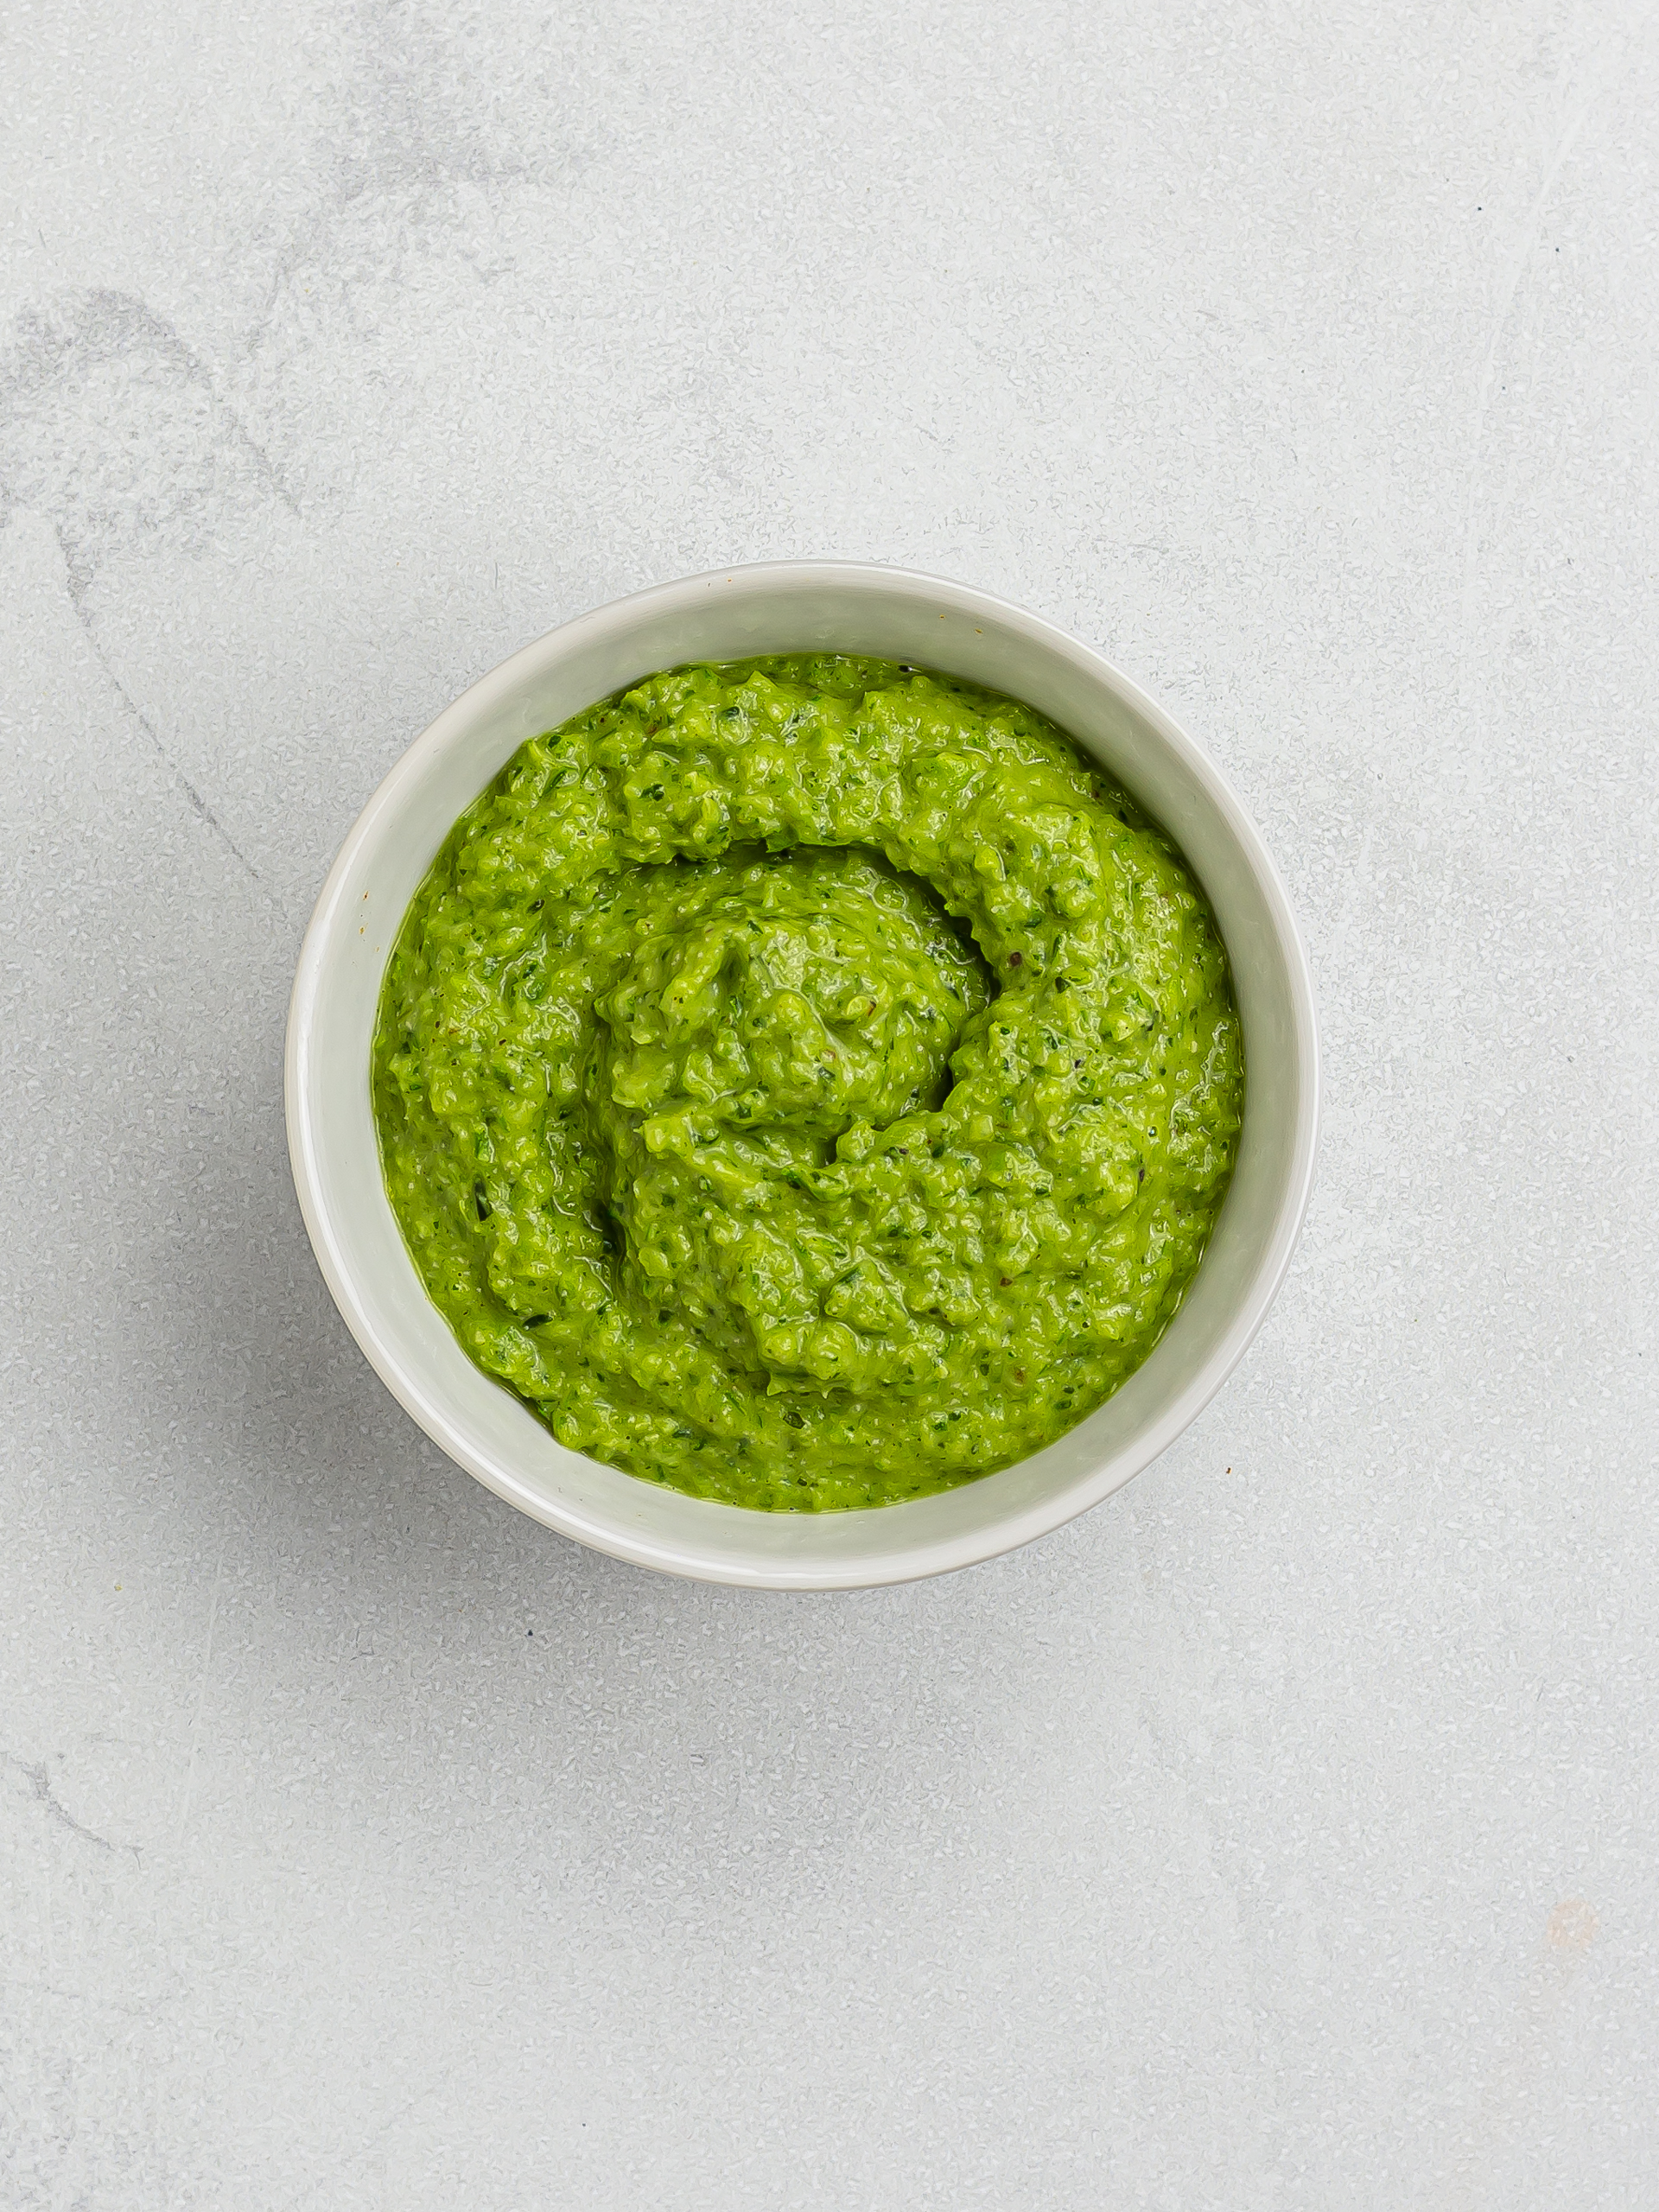 mashed peas with broccoli and nutritional yeast